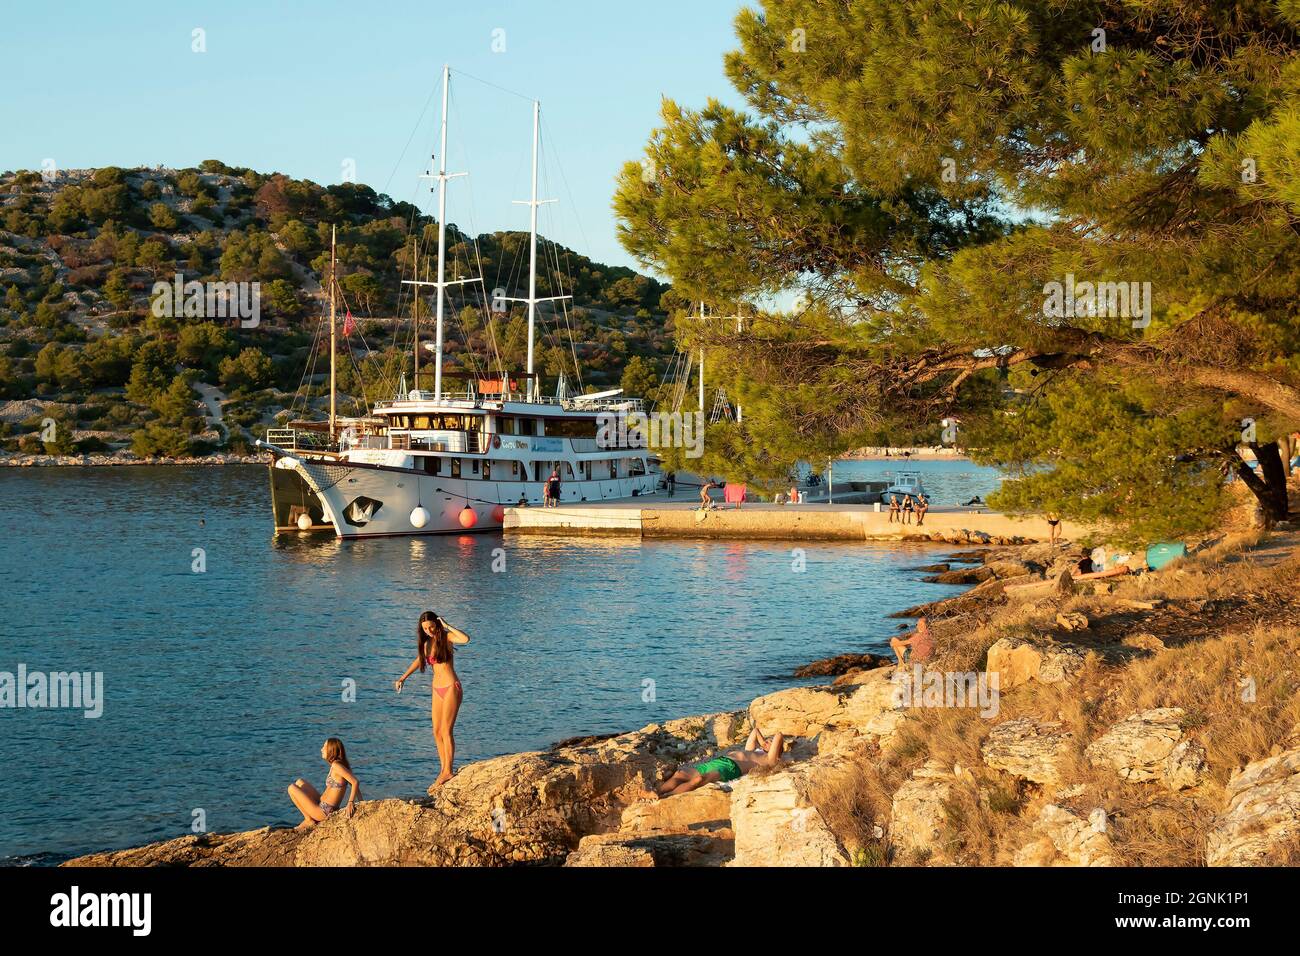 Podvrske, Murter, Croatia - August 26, 2021: Rocky beach with pine trees and people in swimsuits, and ship docked at the pier behind them, in summer s Stock Photo